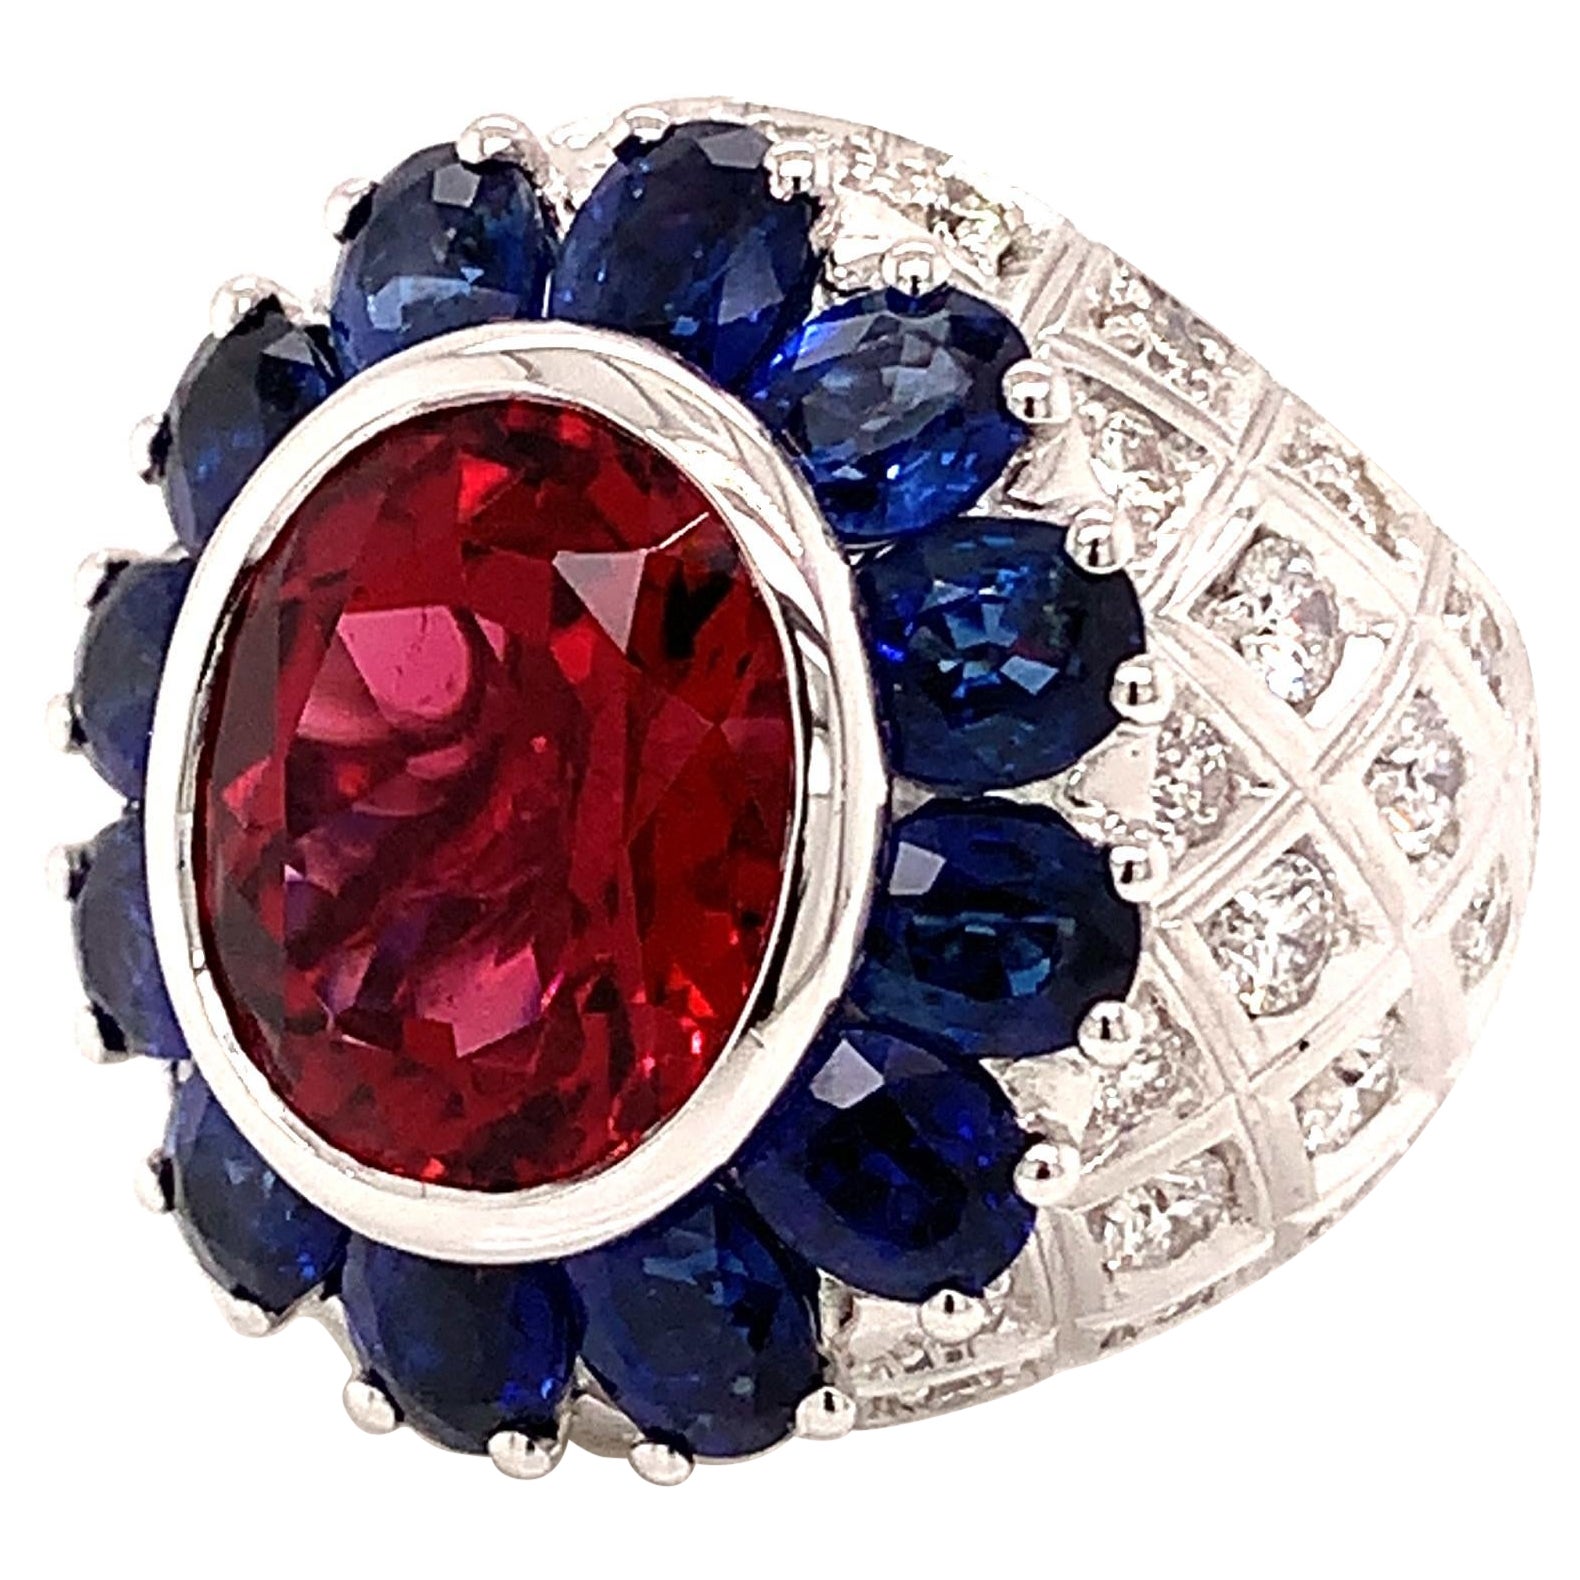 18kt White Gold One of a Kind Ring with 5 Ct Rubellite, Blue Sapphires, Diamond